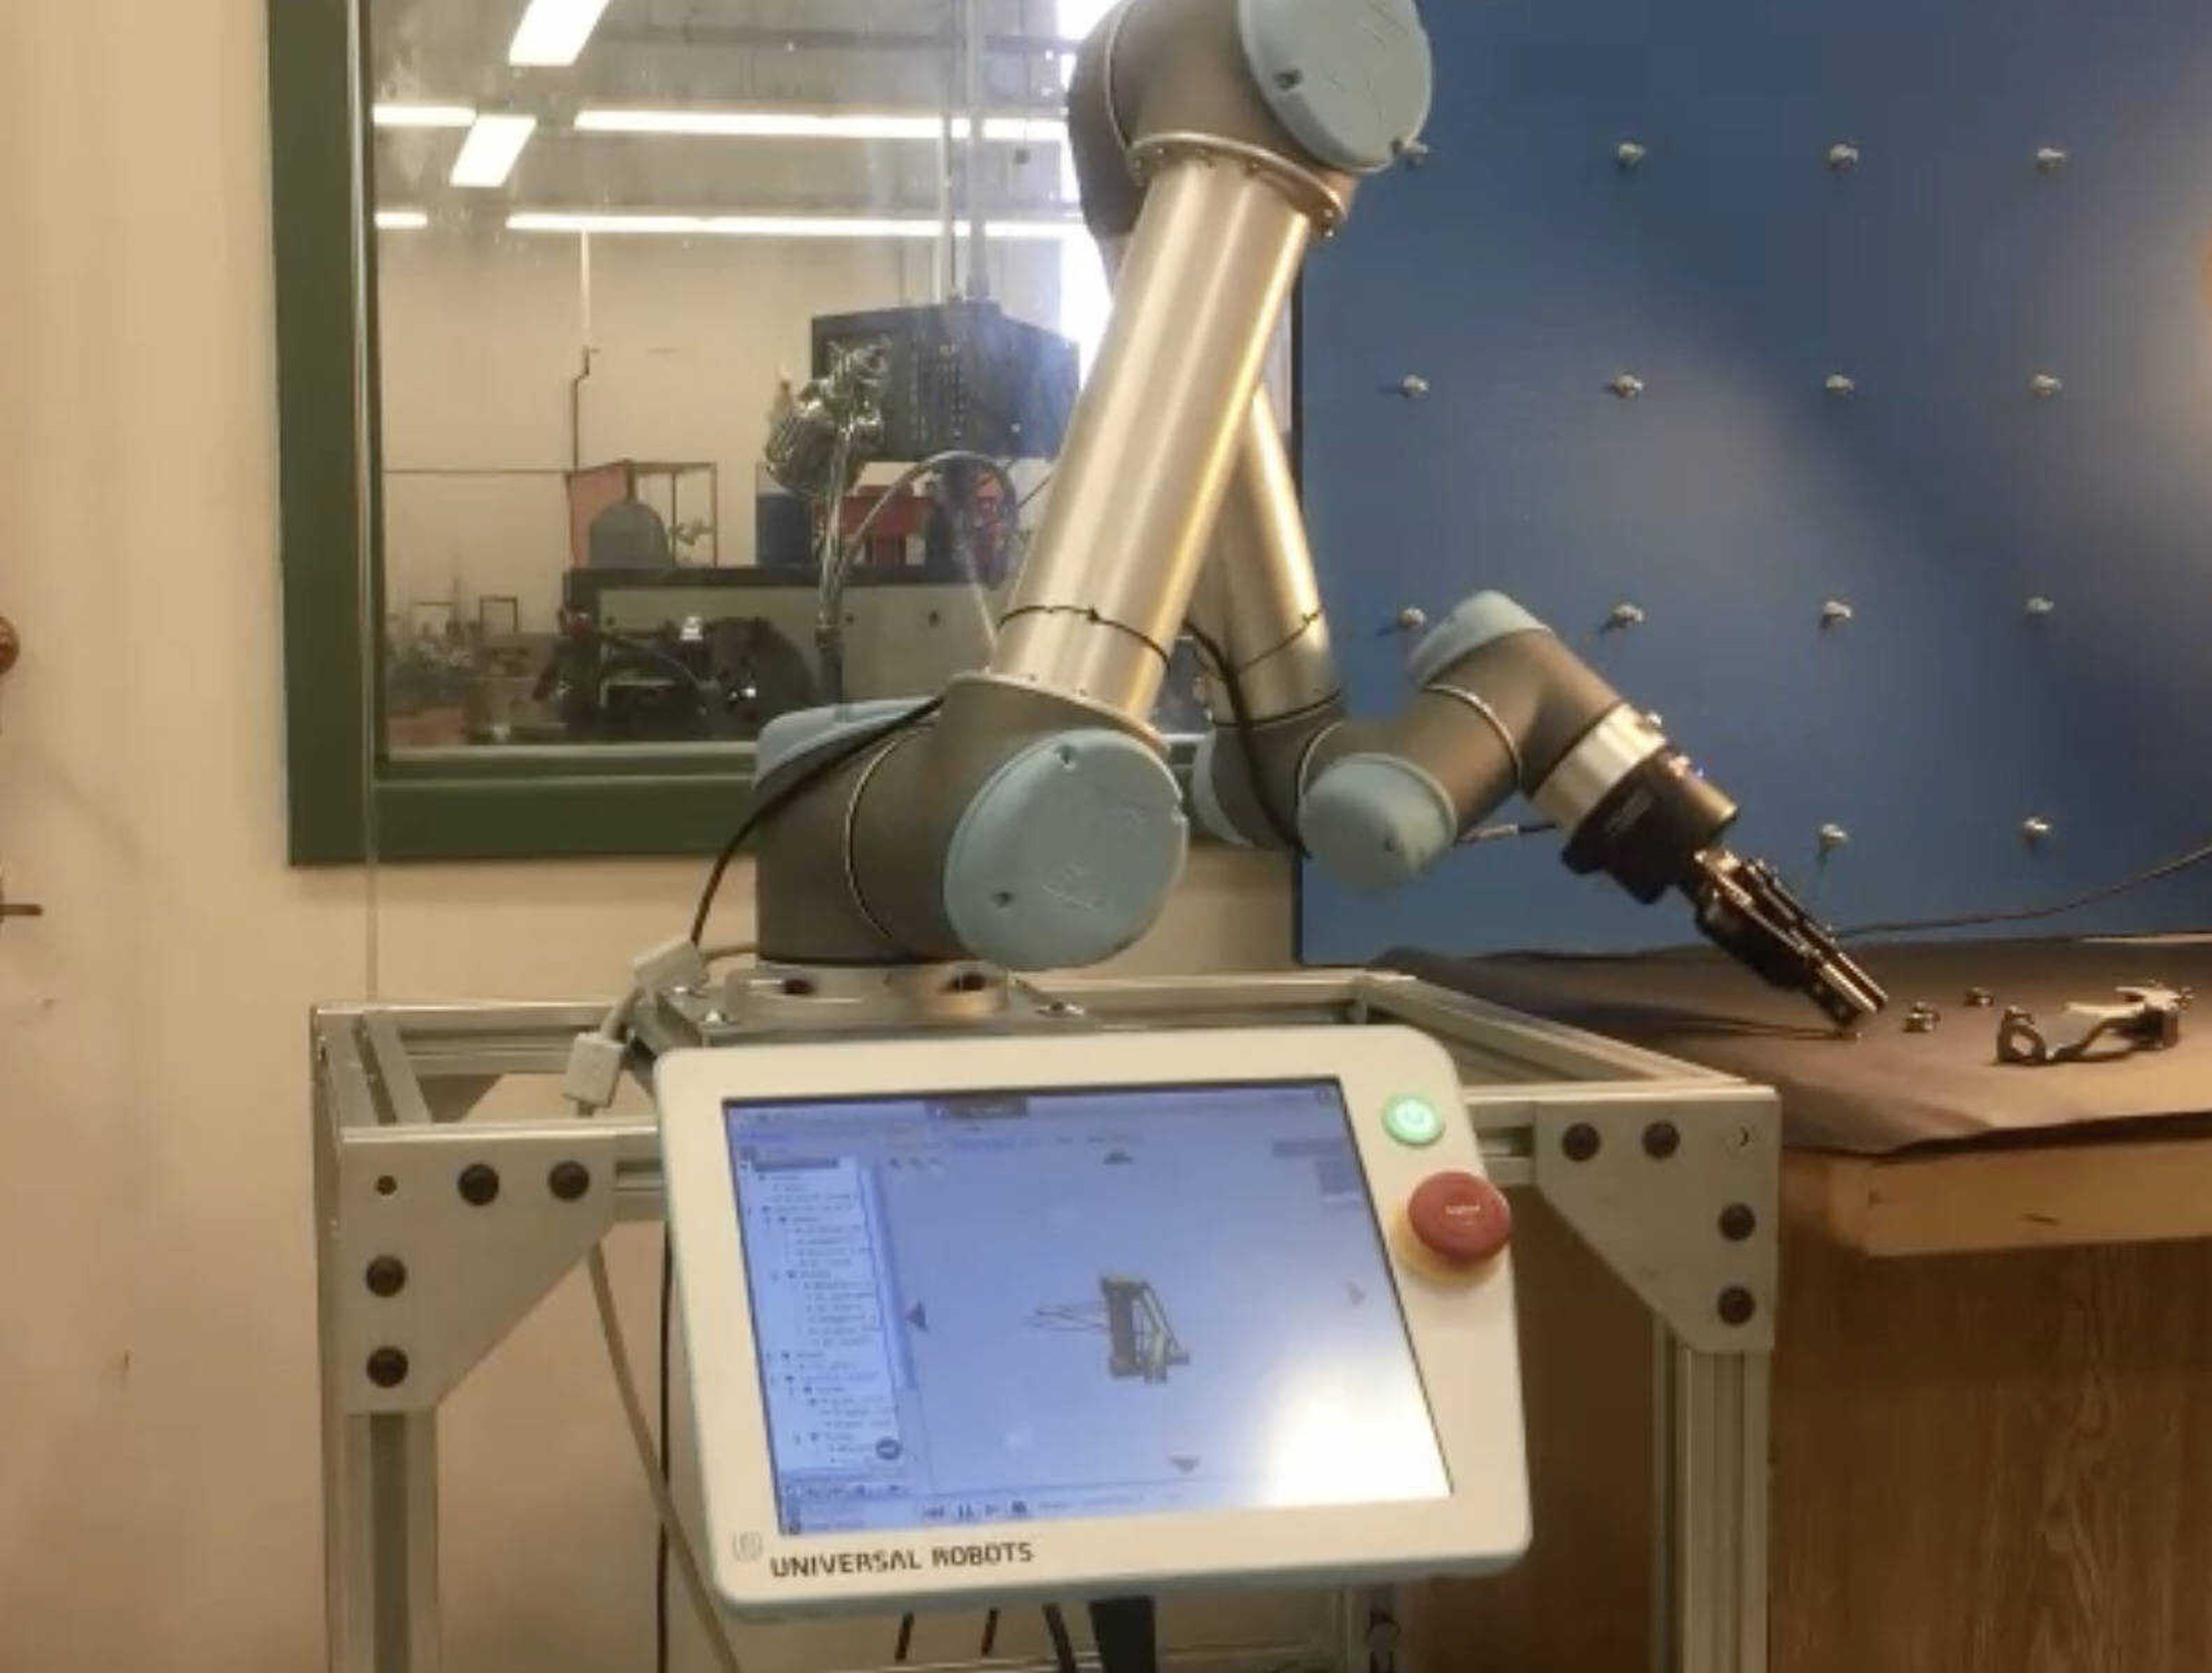 The robotic arm that was added to the Department of Polytechnic studies.